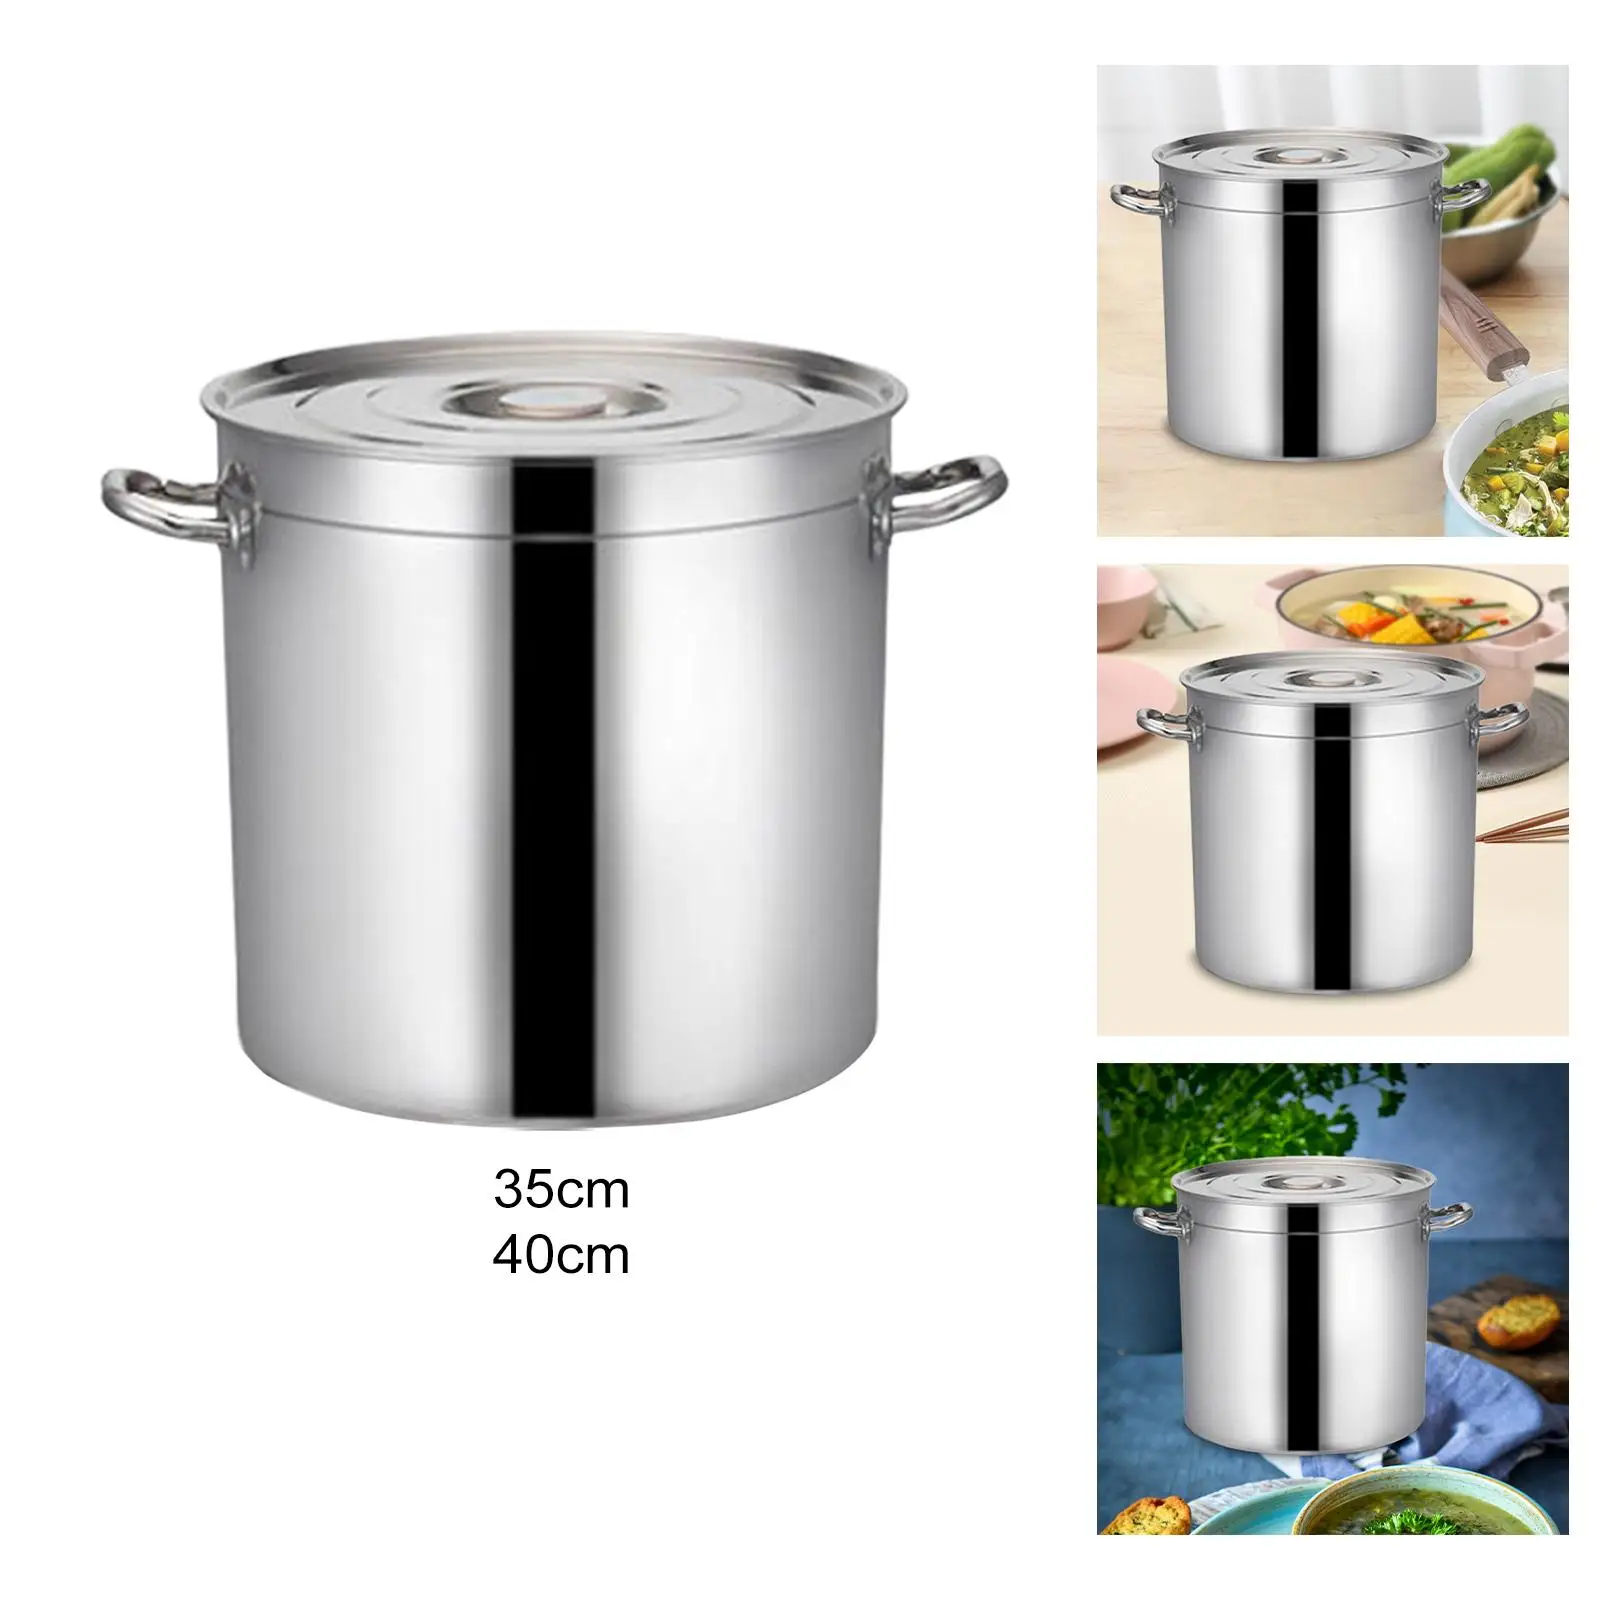 Stainless Steel Cookware Stockpot Tall Cooking Pot for Household Commercial